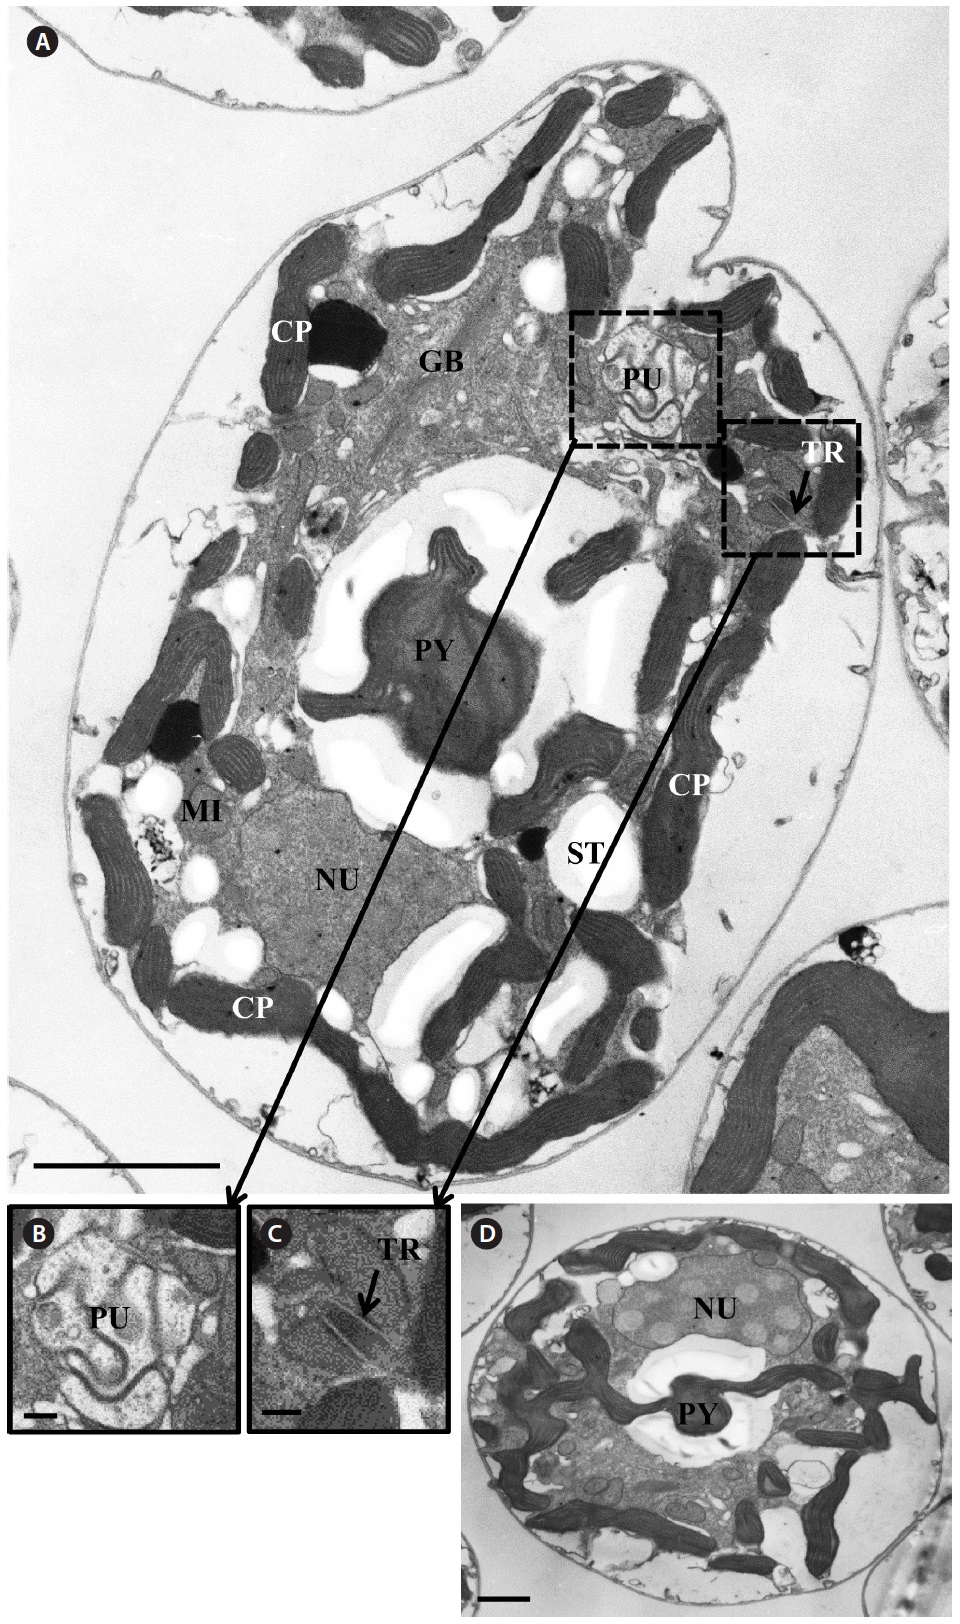 Micrographs of the Korean strains of Amphidinium massartii AMJJ1 taken using transmission electron microscopy. (A) Longitudinal section showing several organelles inside the protoplasm. PY, pyrenoid; PU, pusule, TR, trichocyst; GB, Golgi body; CP, chloroplast; MI, mitochondrion; NU, nucleus; ST, starch. (B) Enlarged part of Fig. 8A showing PU. (C) Enlarged part of Fig. 8A showing TR. (D) Transverse section showing PY and NU. Scale bars represent: A, 2 μm; B & C, 200 nm; D, 1 μm.